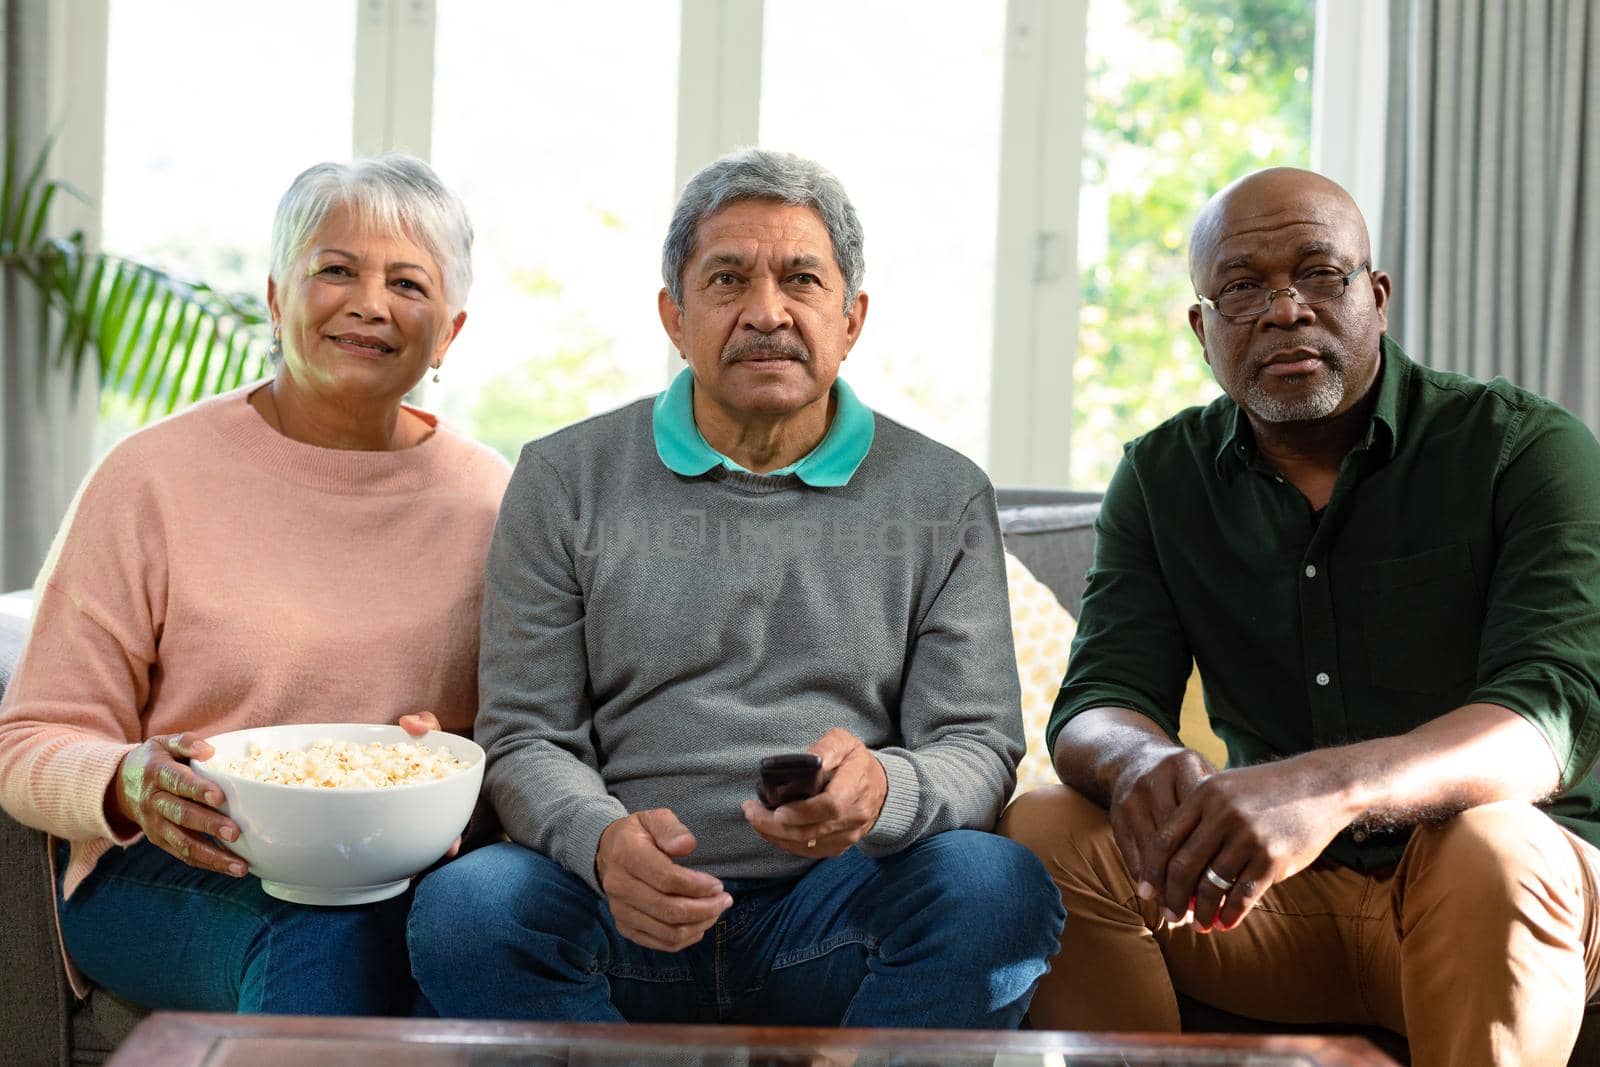 Two focused diverse senior couple and their african american male friend watching tv and having fun. retirement lifestyle relaxing at home with technology.